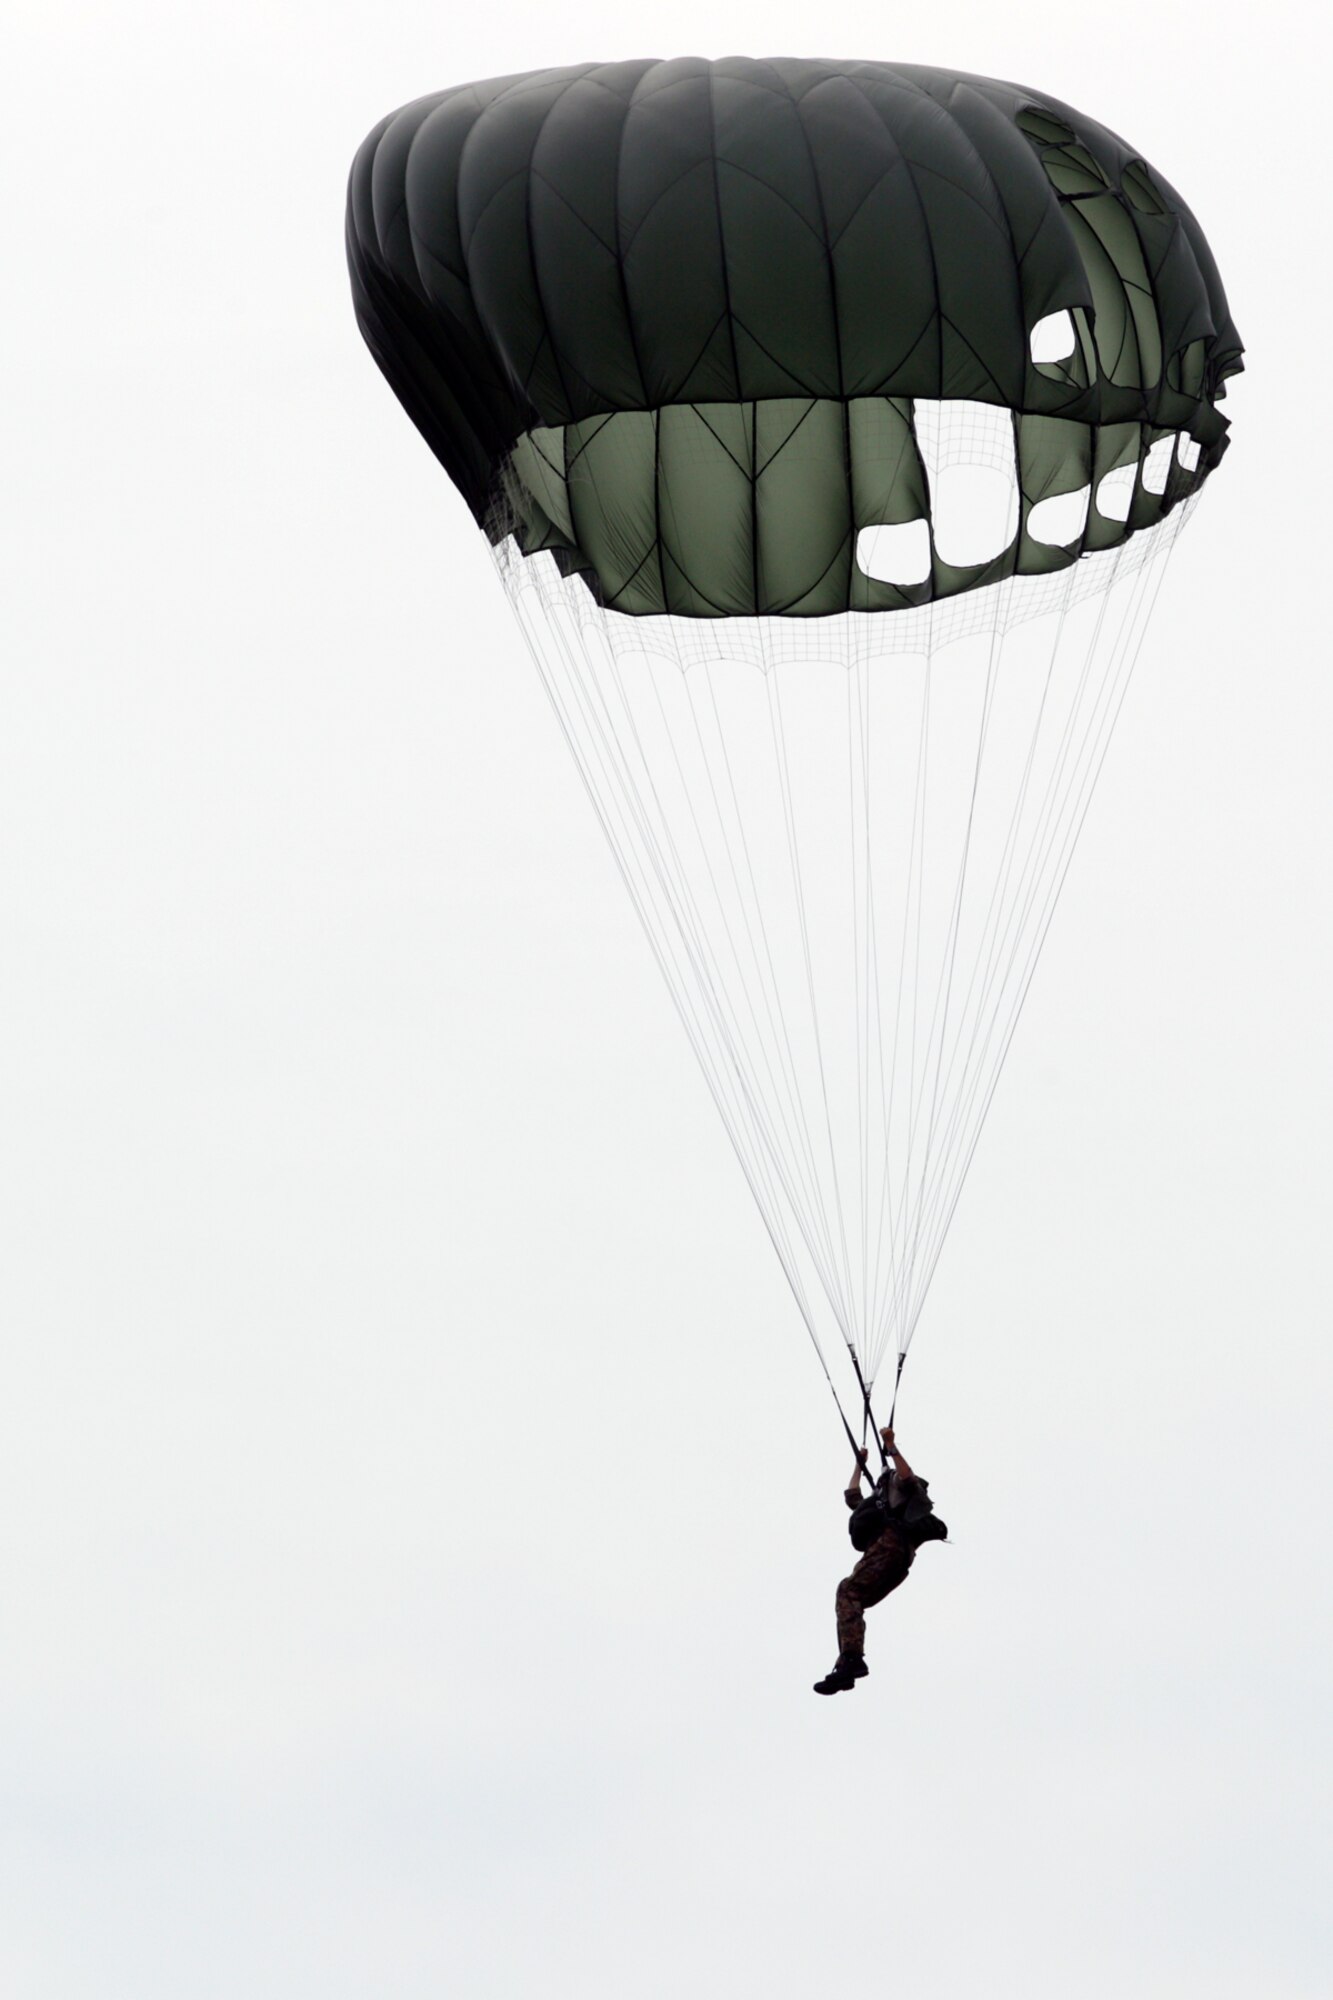 2Lt. Robert McLean, commander of the 107th Weather Flight, Michigan Air National Guard, prepares to land after a successful parachute jump at Selfridge Air National Guard Base, Mich., Aug. 13, 2013. The Weather Flight is a special operations team with members proficient in a wide variety of military skills – in addition to being trained as weather forecasting specialists. Knowledge of weather conditions can be a crucial piece of data for military commanders during any type of operation. (Air National Guard photo by SrA. Toni Stusse)